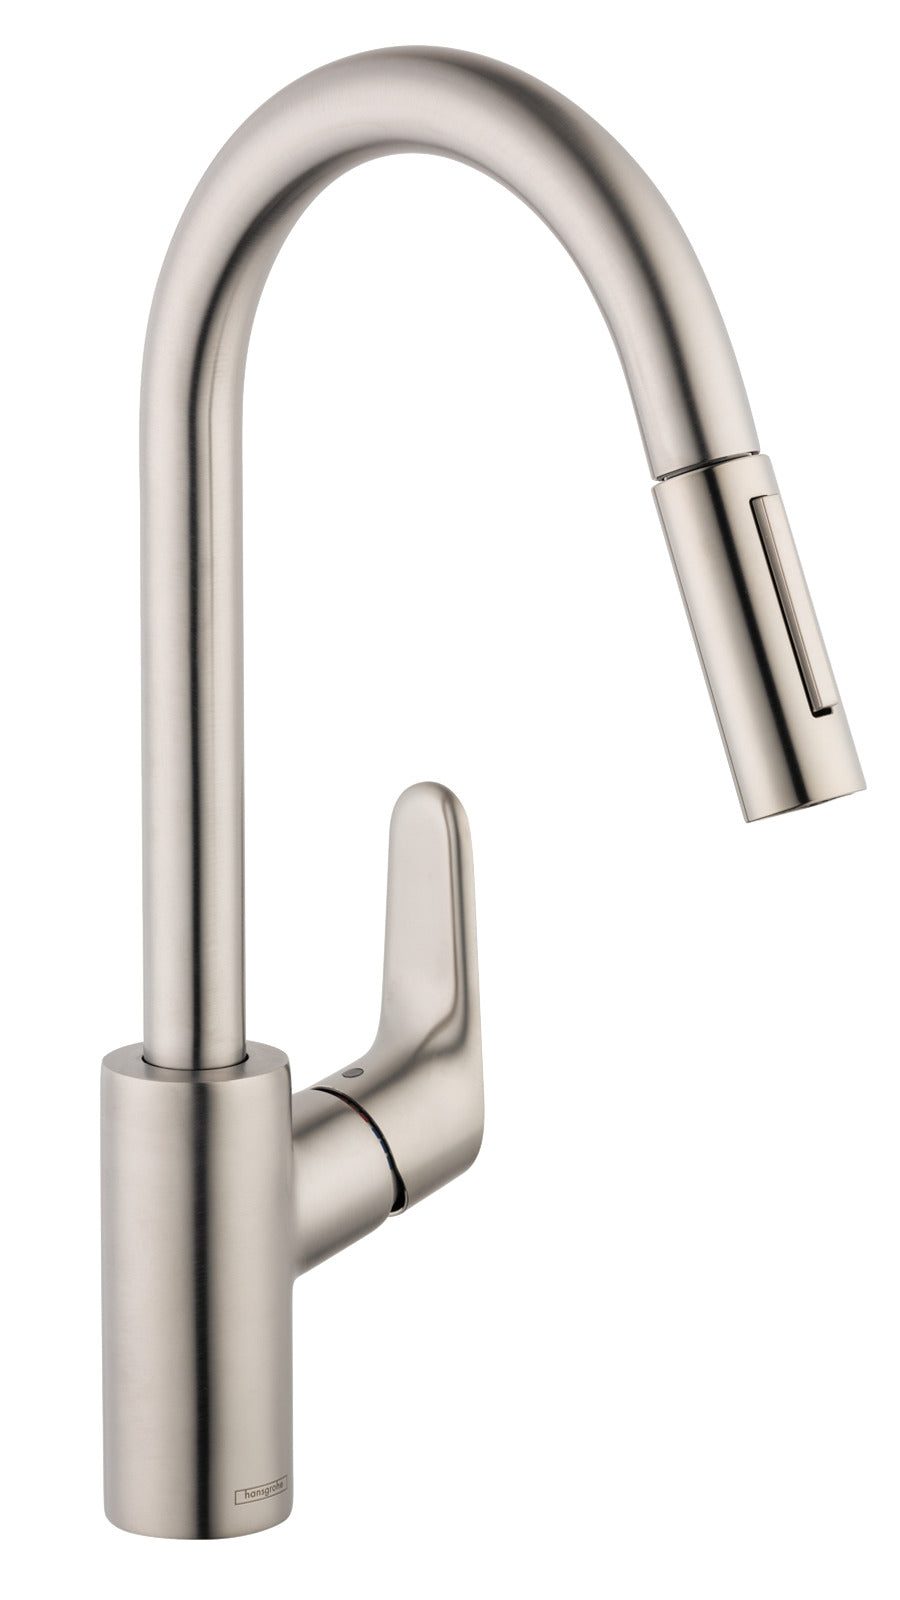 HANSGROHE 04505800 Stainless Steel Optic Focus Modern Kitchen Faucet 1.75 GPM